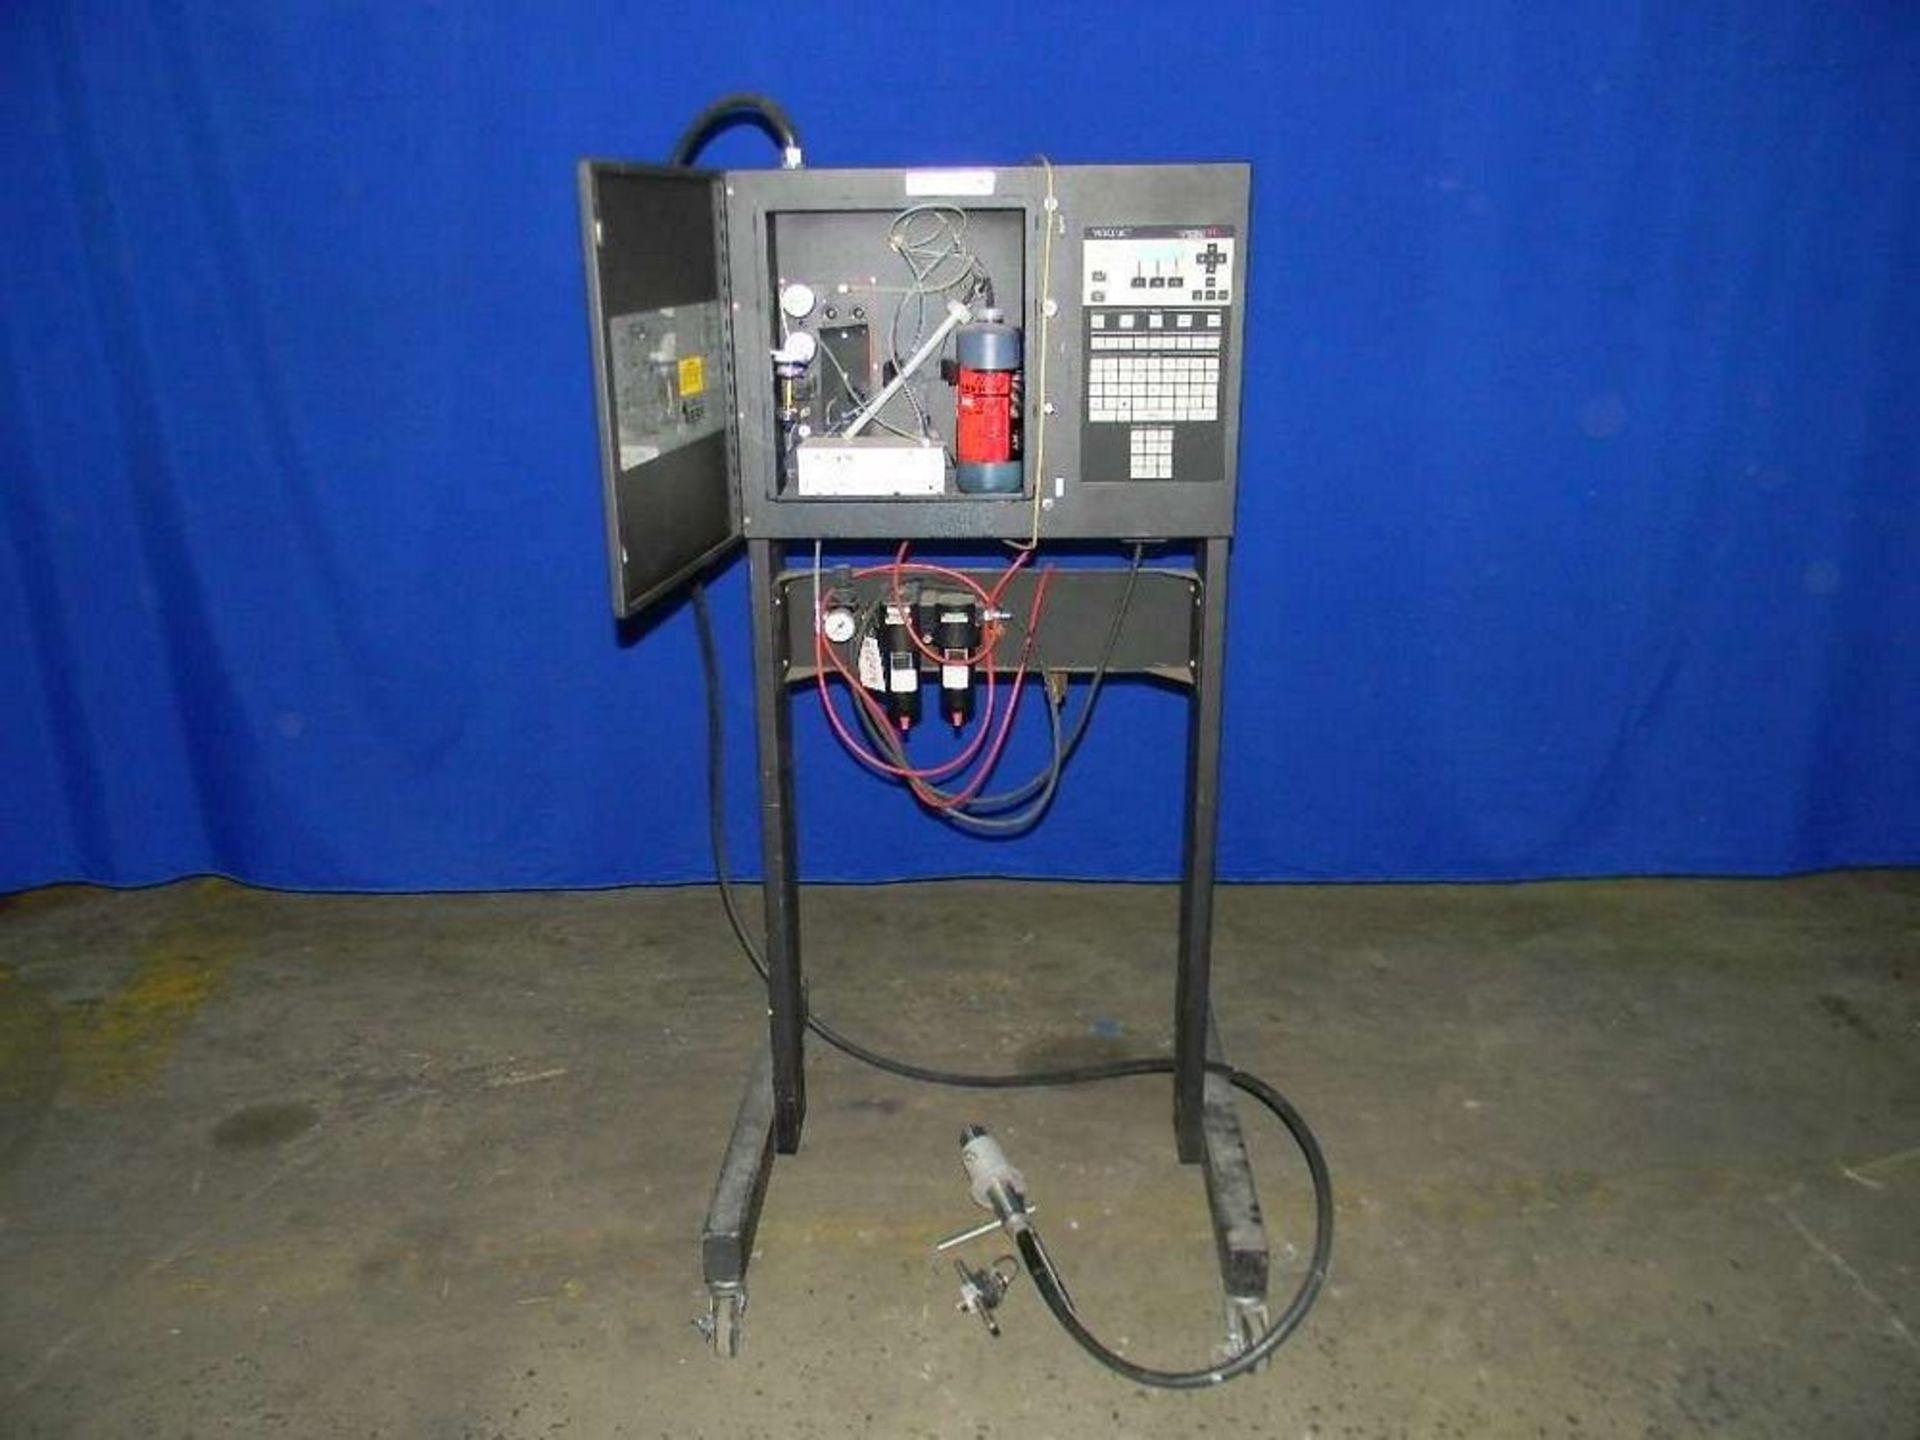 Qty (1) VideoJet 37e Ink Jet Coder - Painted steel cabinet and stand. - Equiped with remote - Image 7 of 7